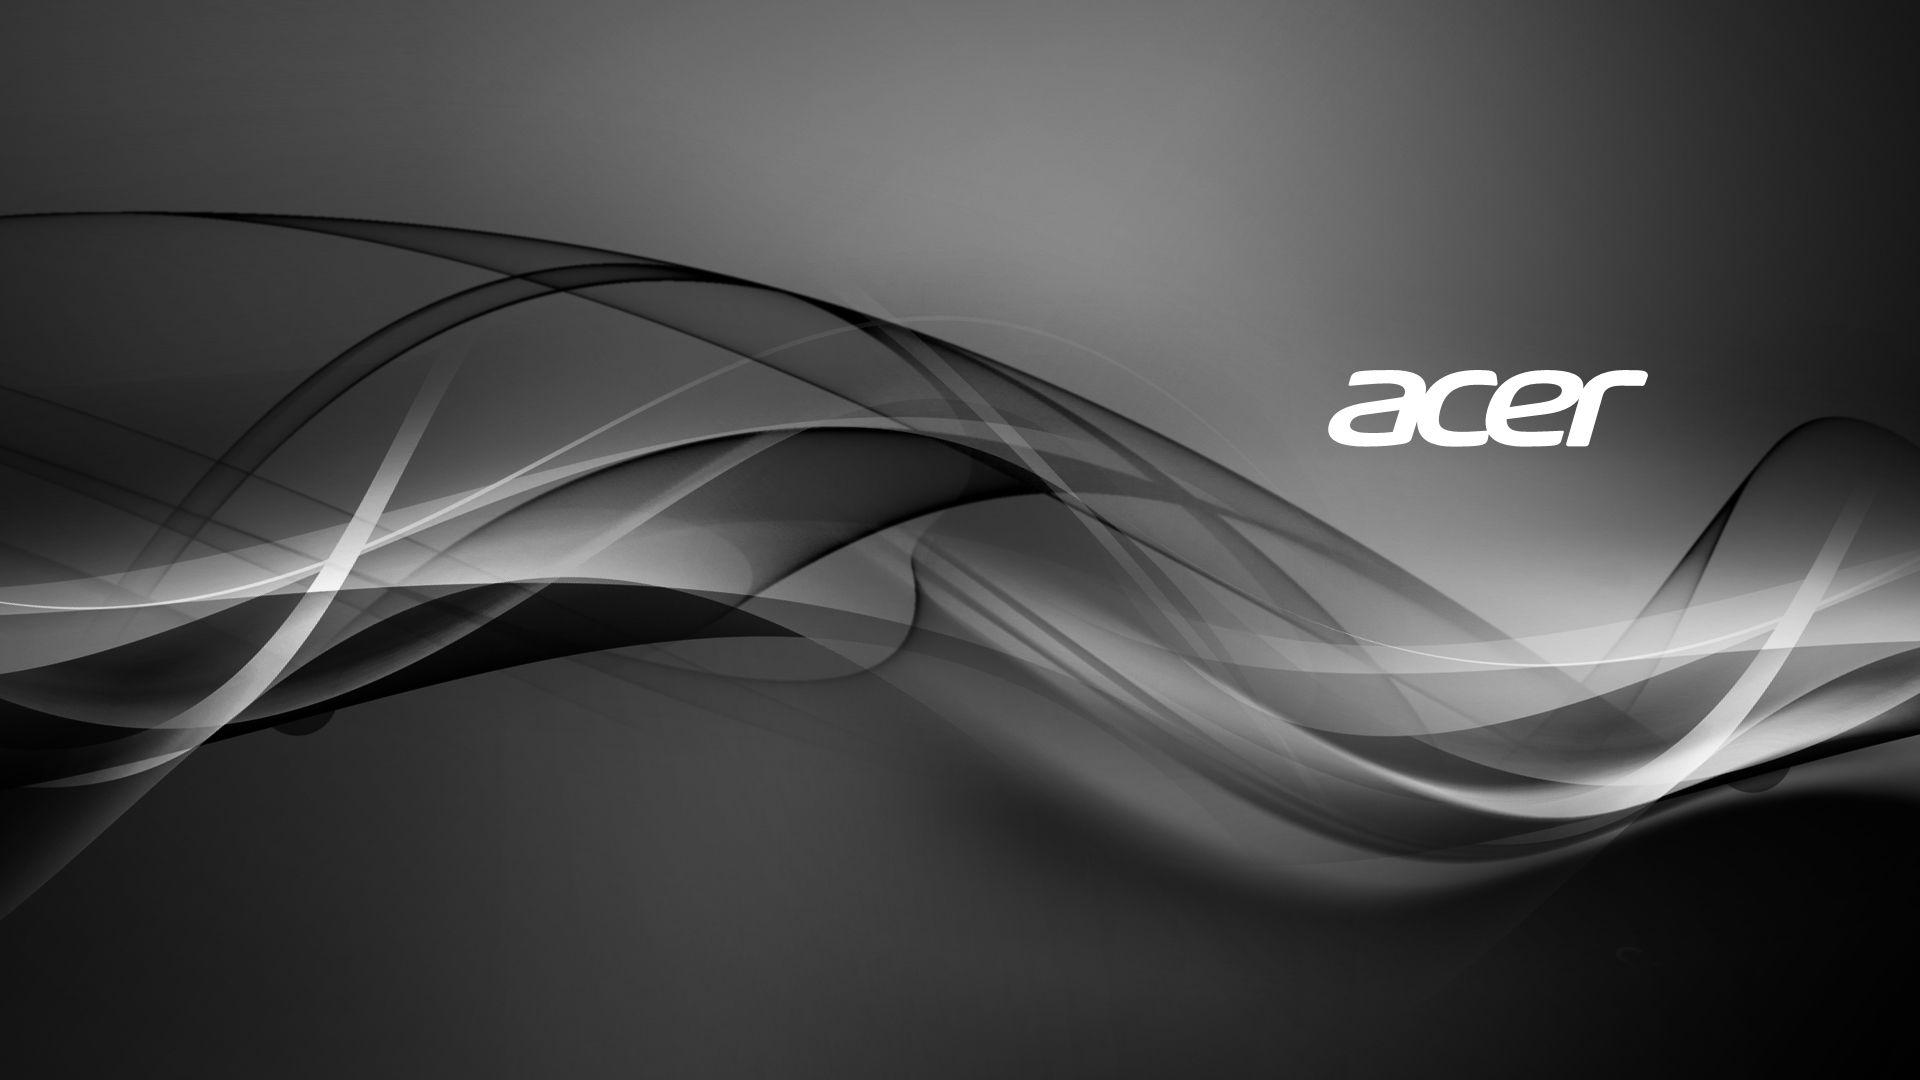 Acer Laptop HD Wallpapers - Wallpaper Cave